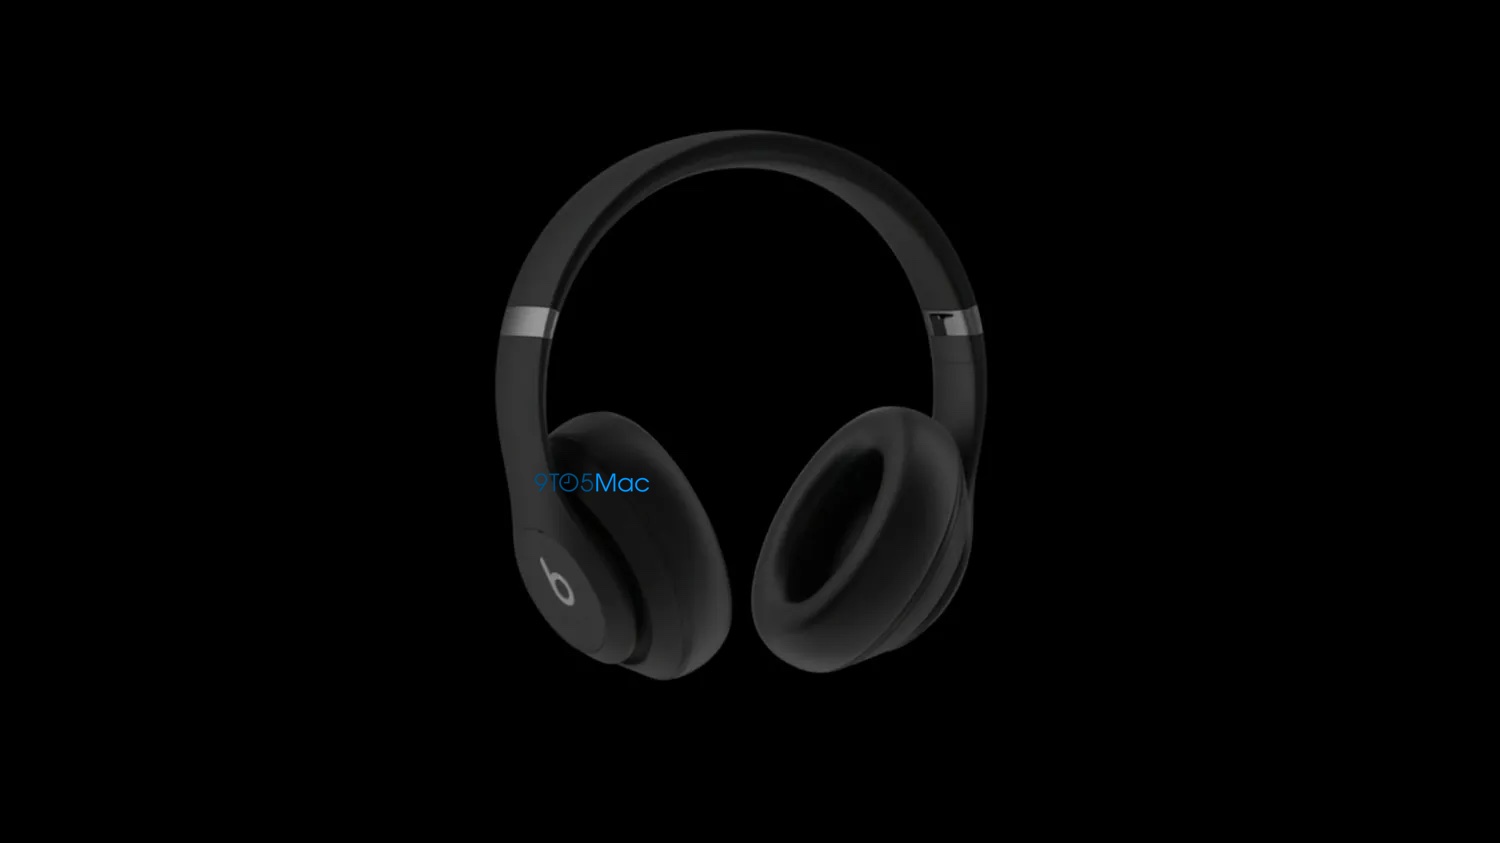 These are the new Beats Studio Pro over-ear headphones